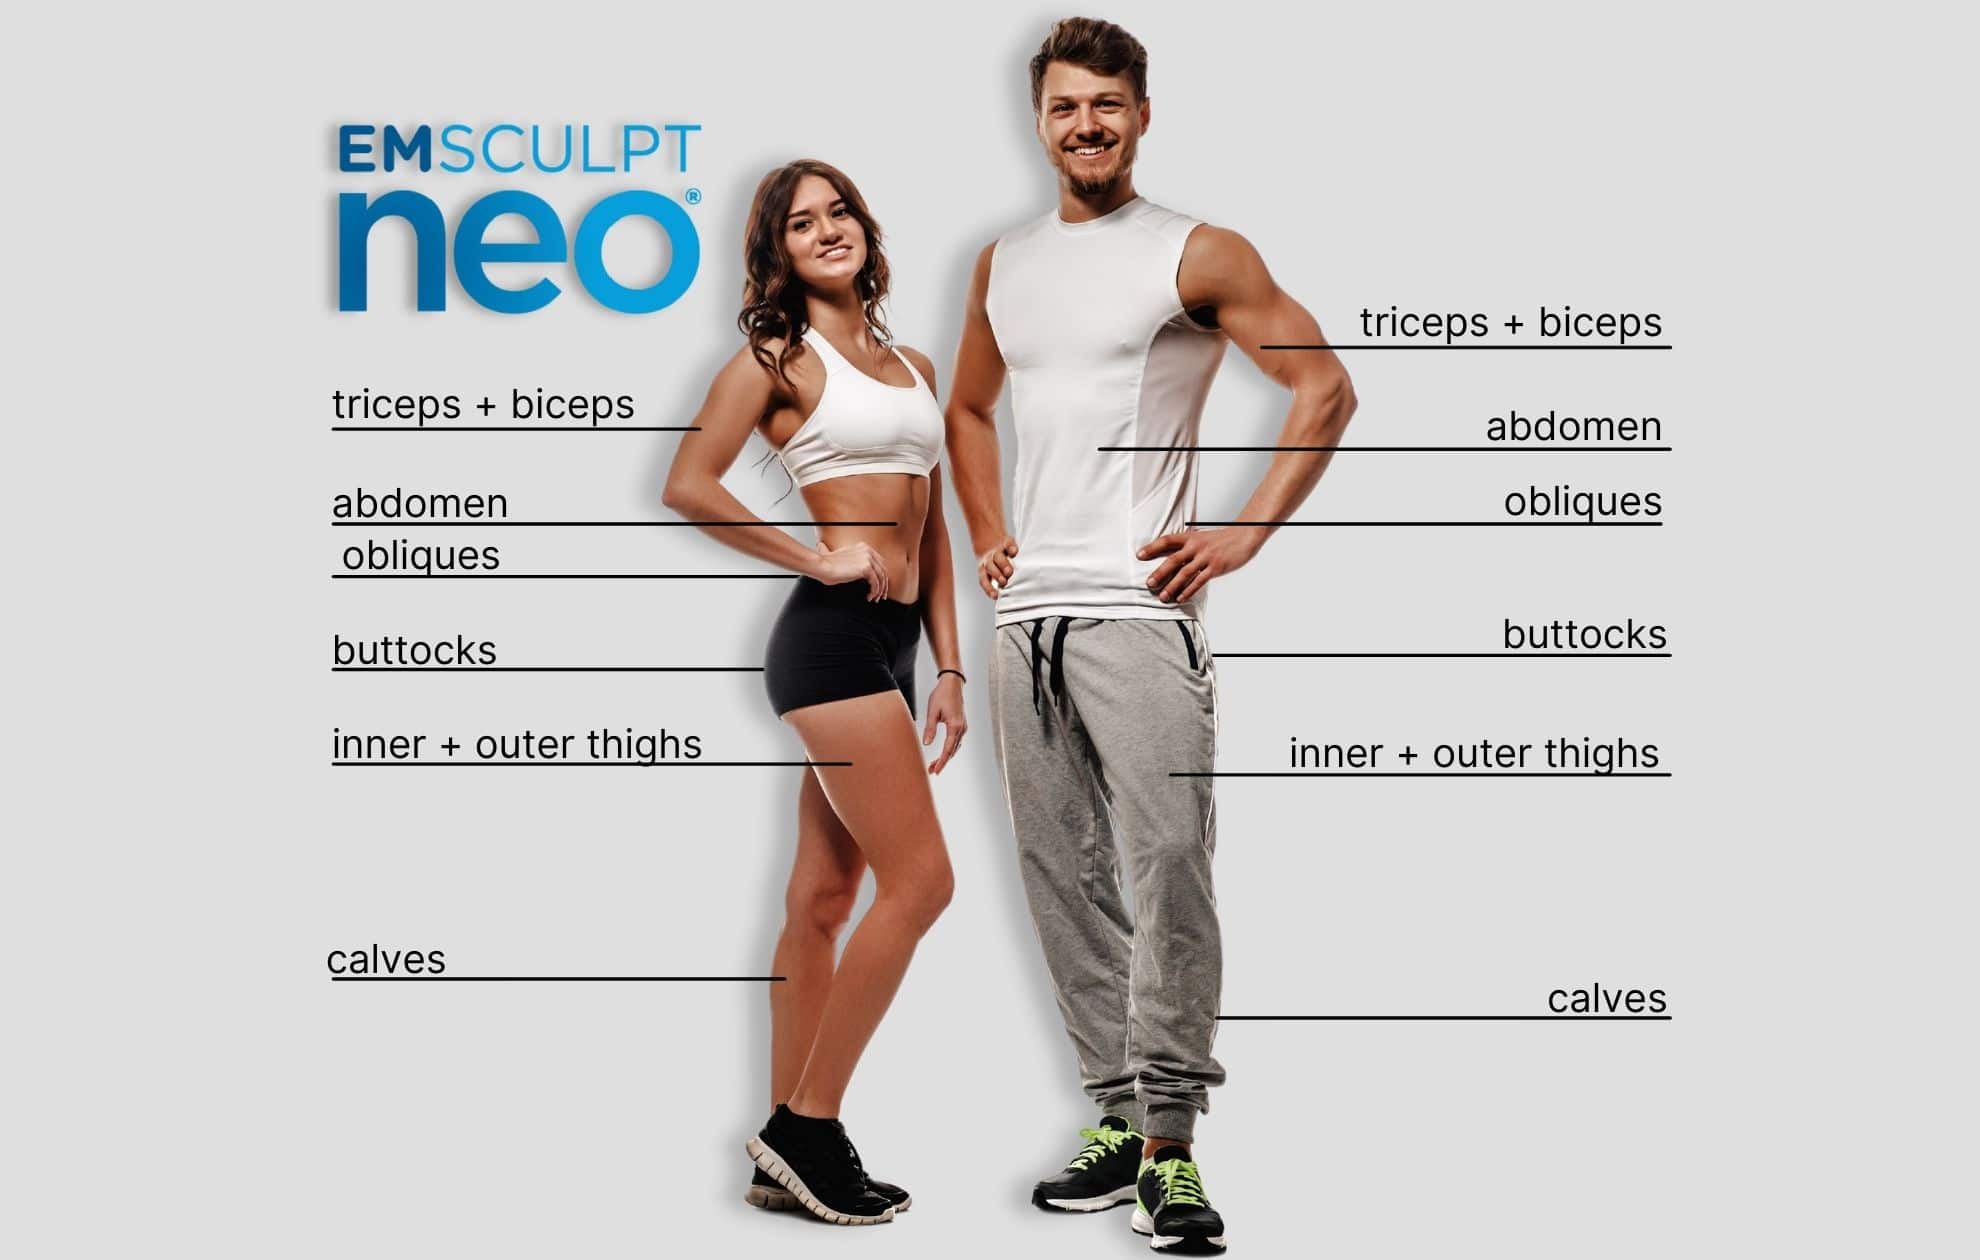 Treatment area graphic for Emsculpt Neo, a man and woman pose to demonstrate treatable areas. Available in Alexandrea, VA.